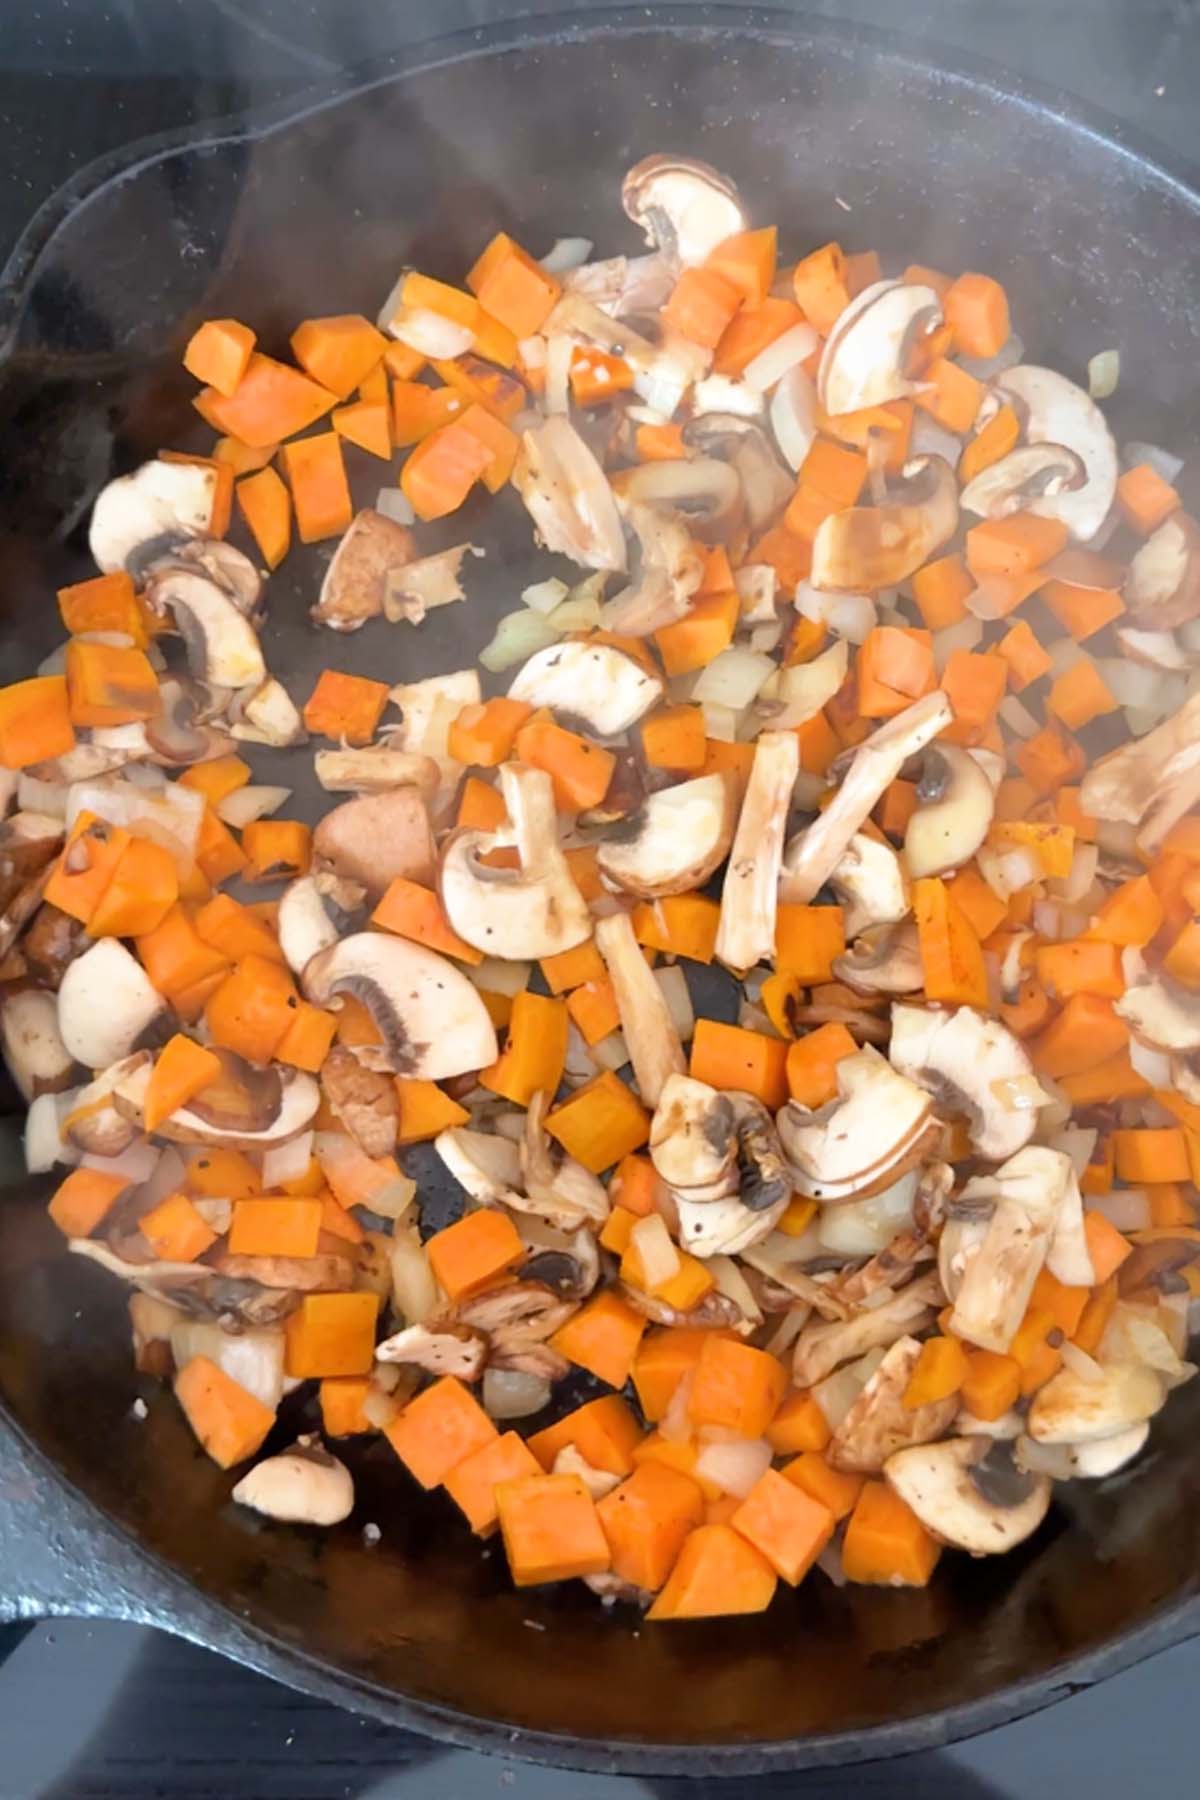 Cubed sweet potato and sliced mushrooms in a cast iron skillet.